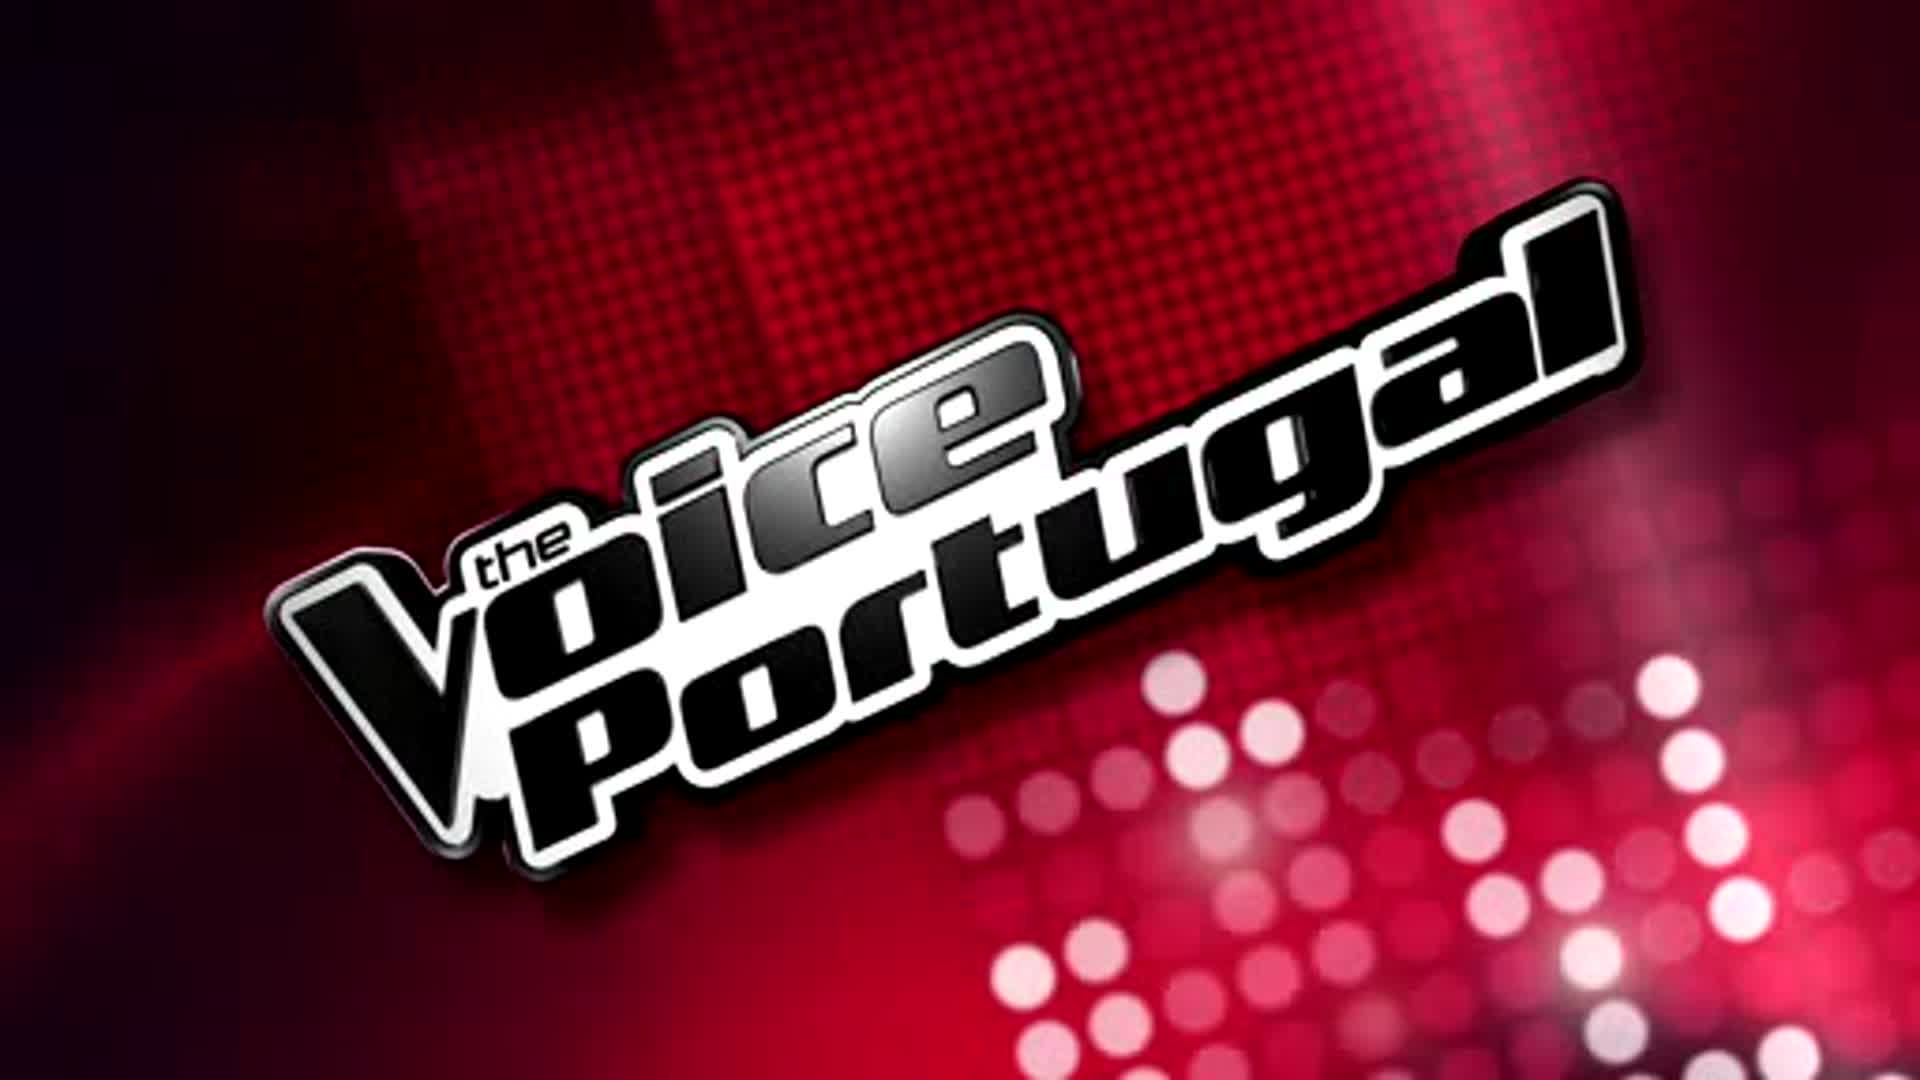 E07B23D2D11545758649C53B0502C3231 8 Saiba O Que Vai Acontecer No Regresso Do «The Voice Portugal»